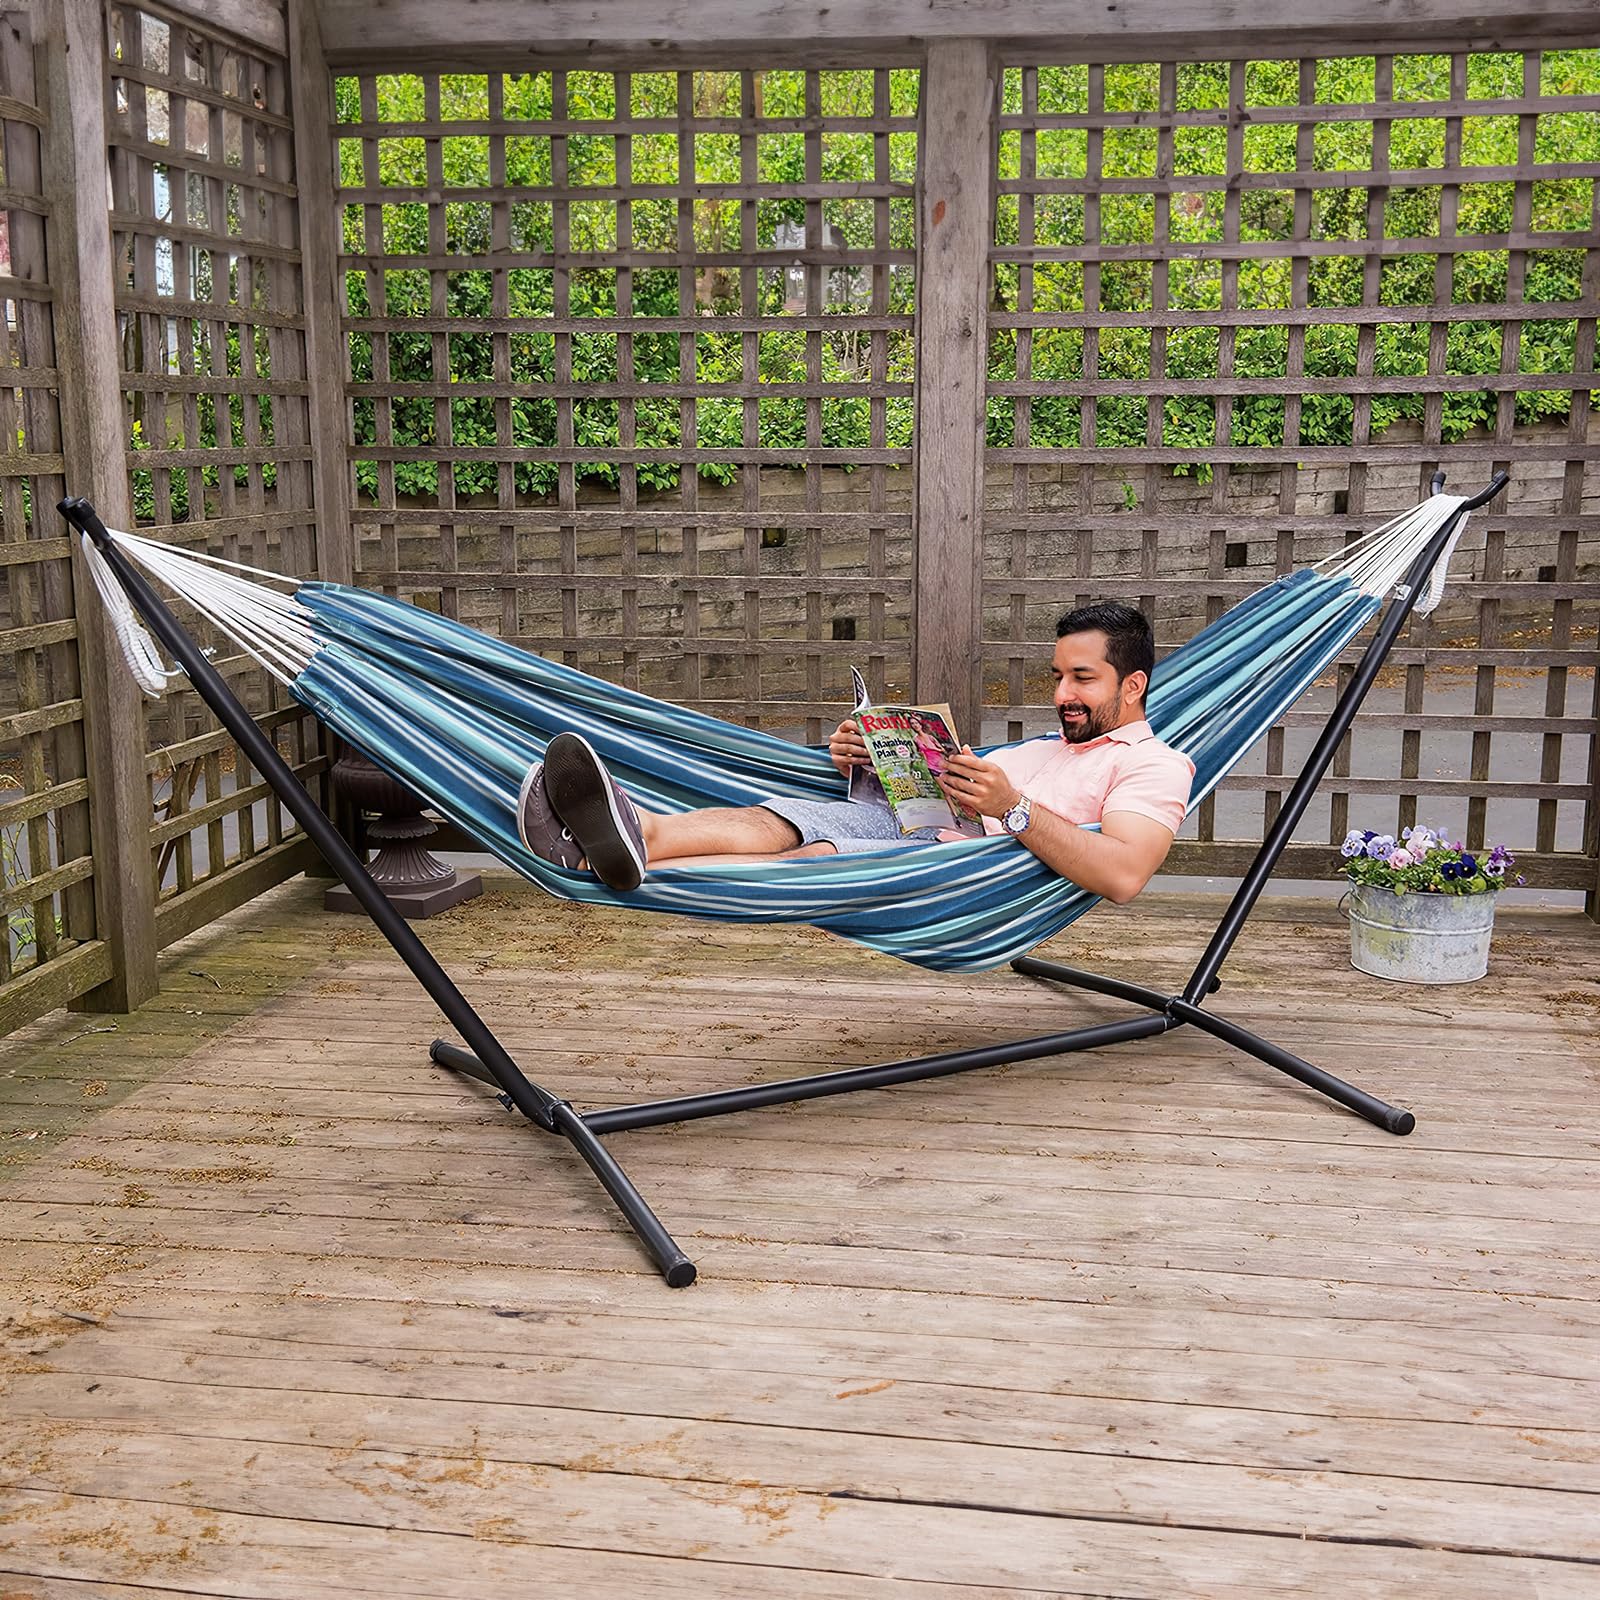 Giantex Hammock with Stand for Outside